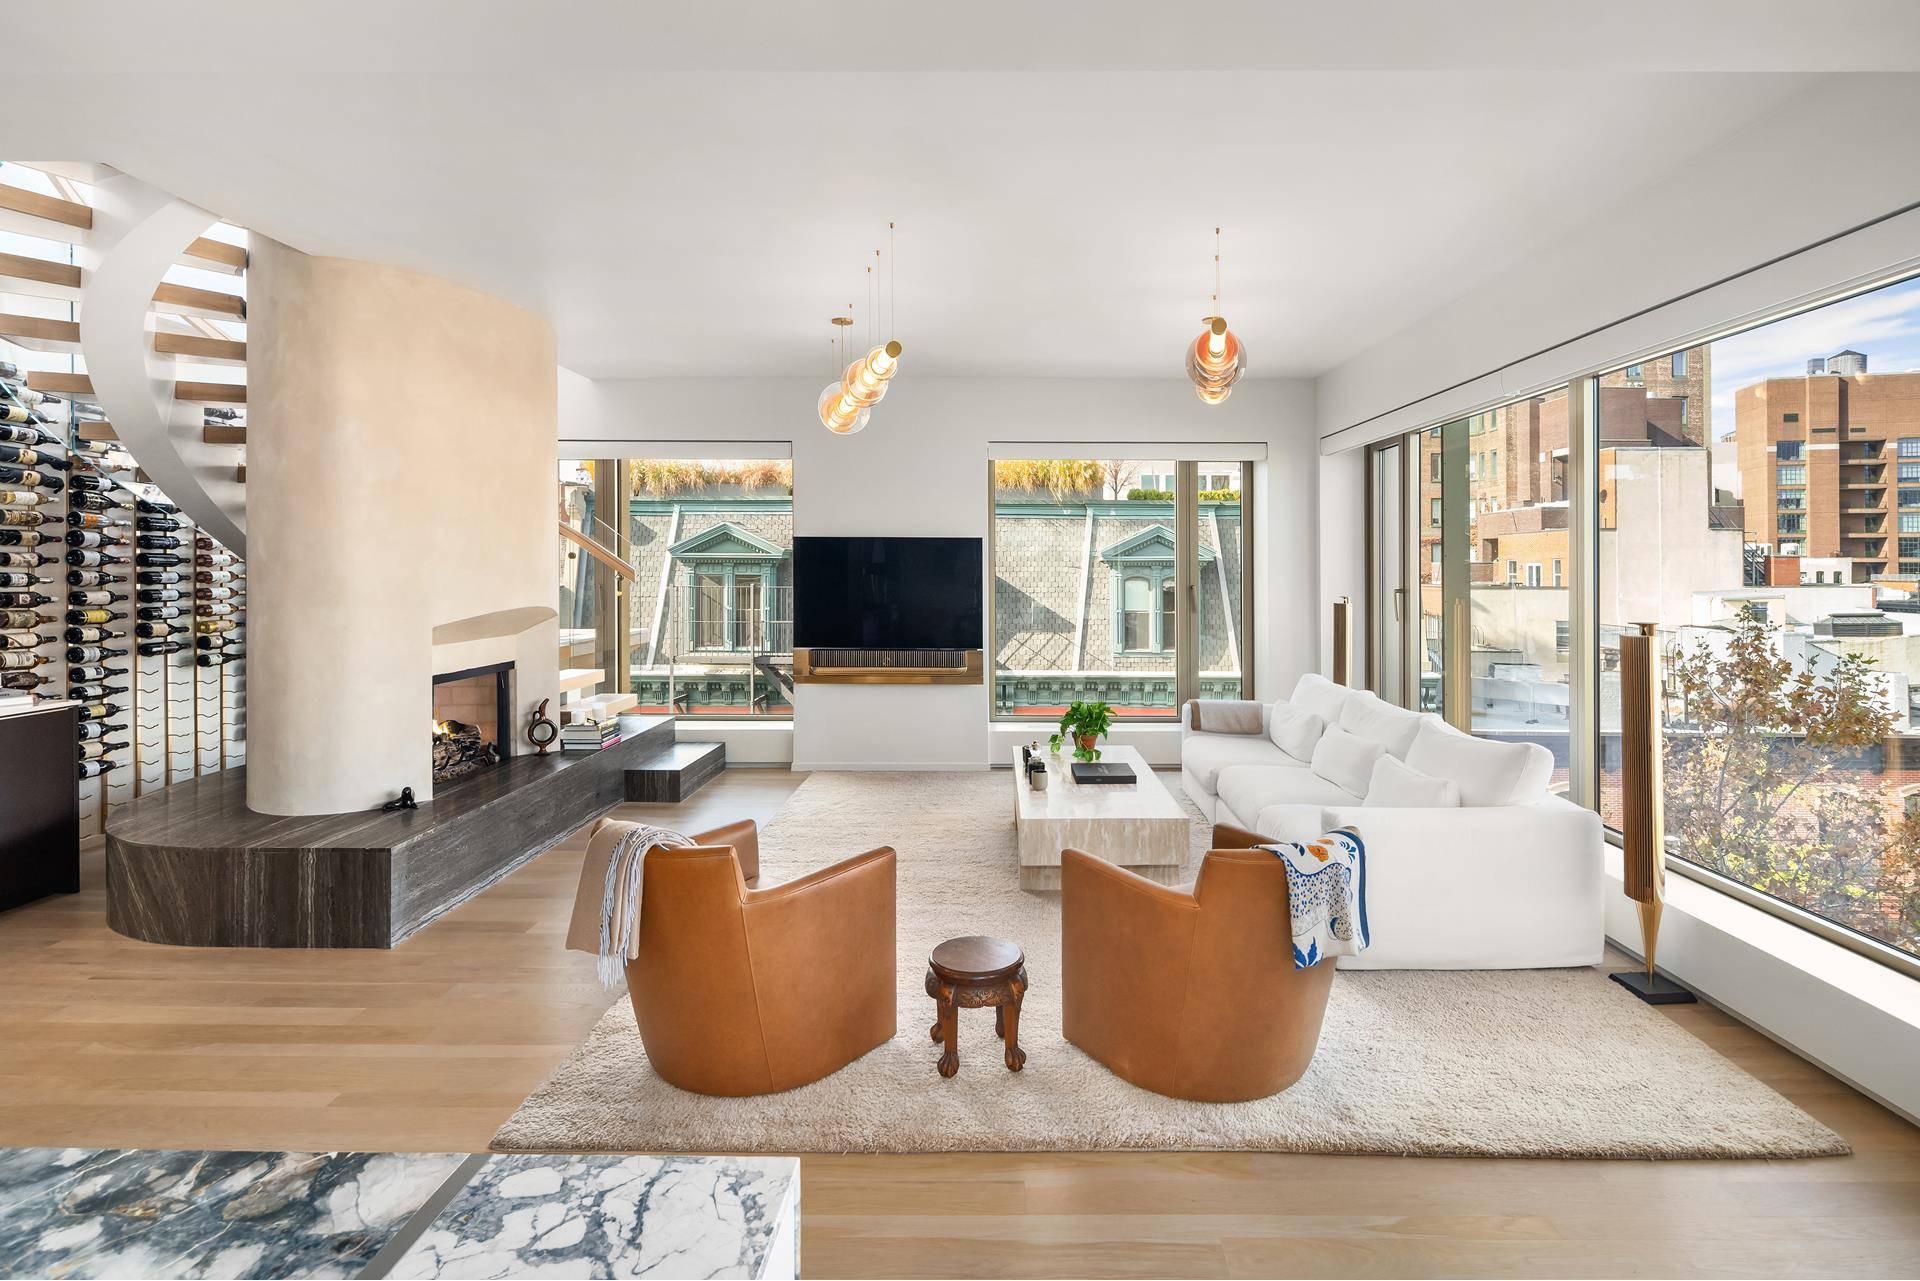 RESIDENCE PHC AT 75 KENMARE STREETA showstopper downtown corner Penthouse residence situated in a New Development condominium building located in one of downtown's hottest neighborhoods, Nolita.